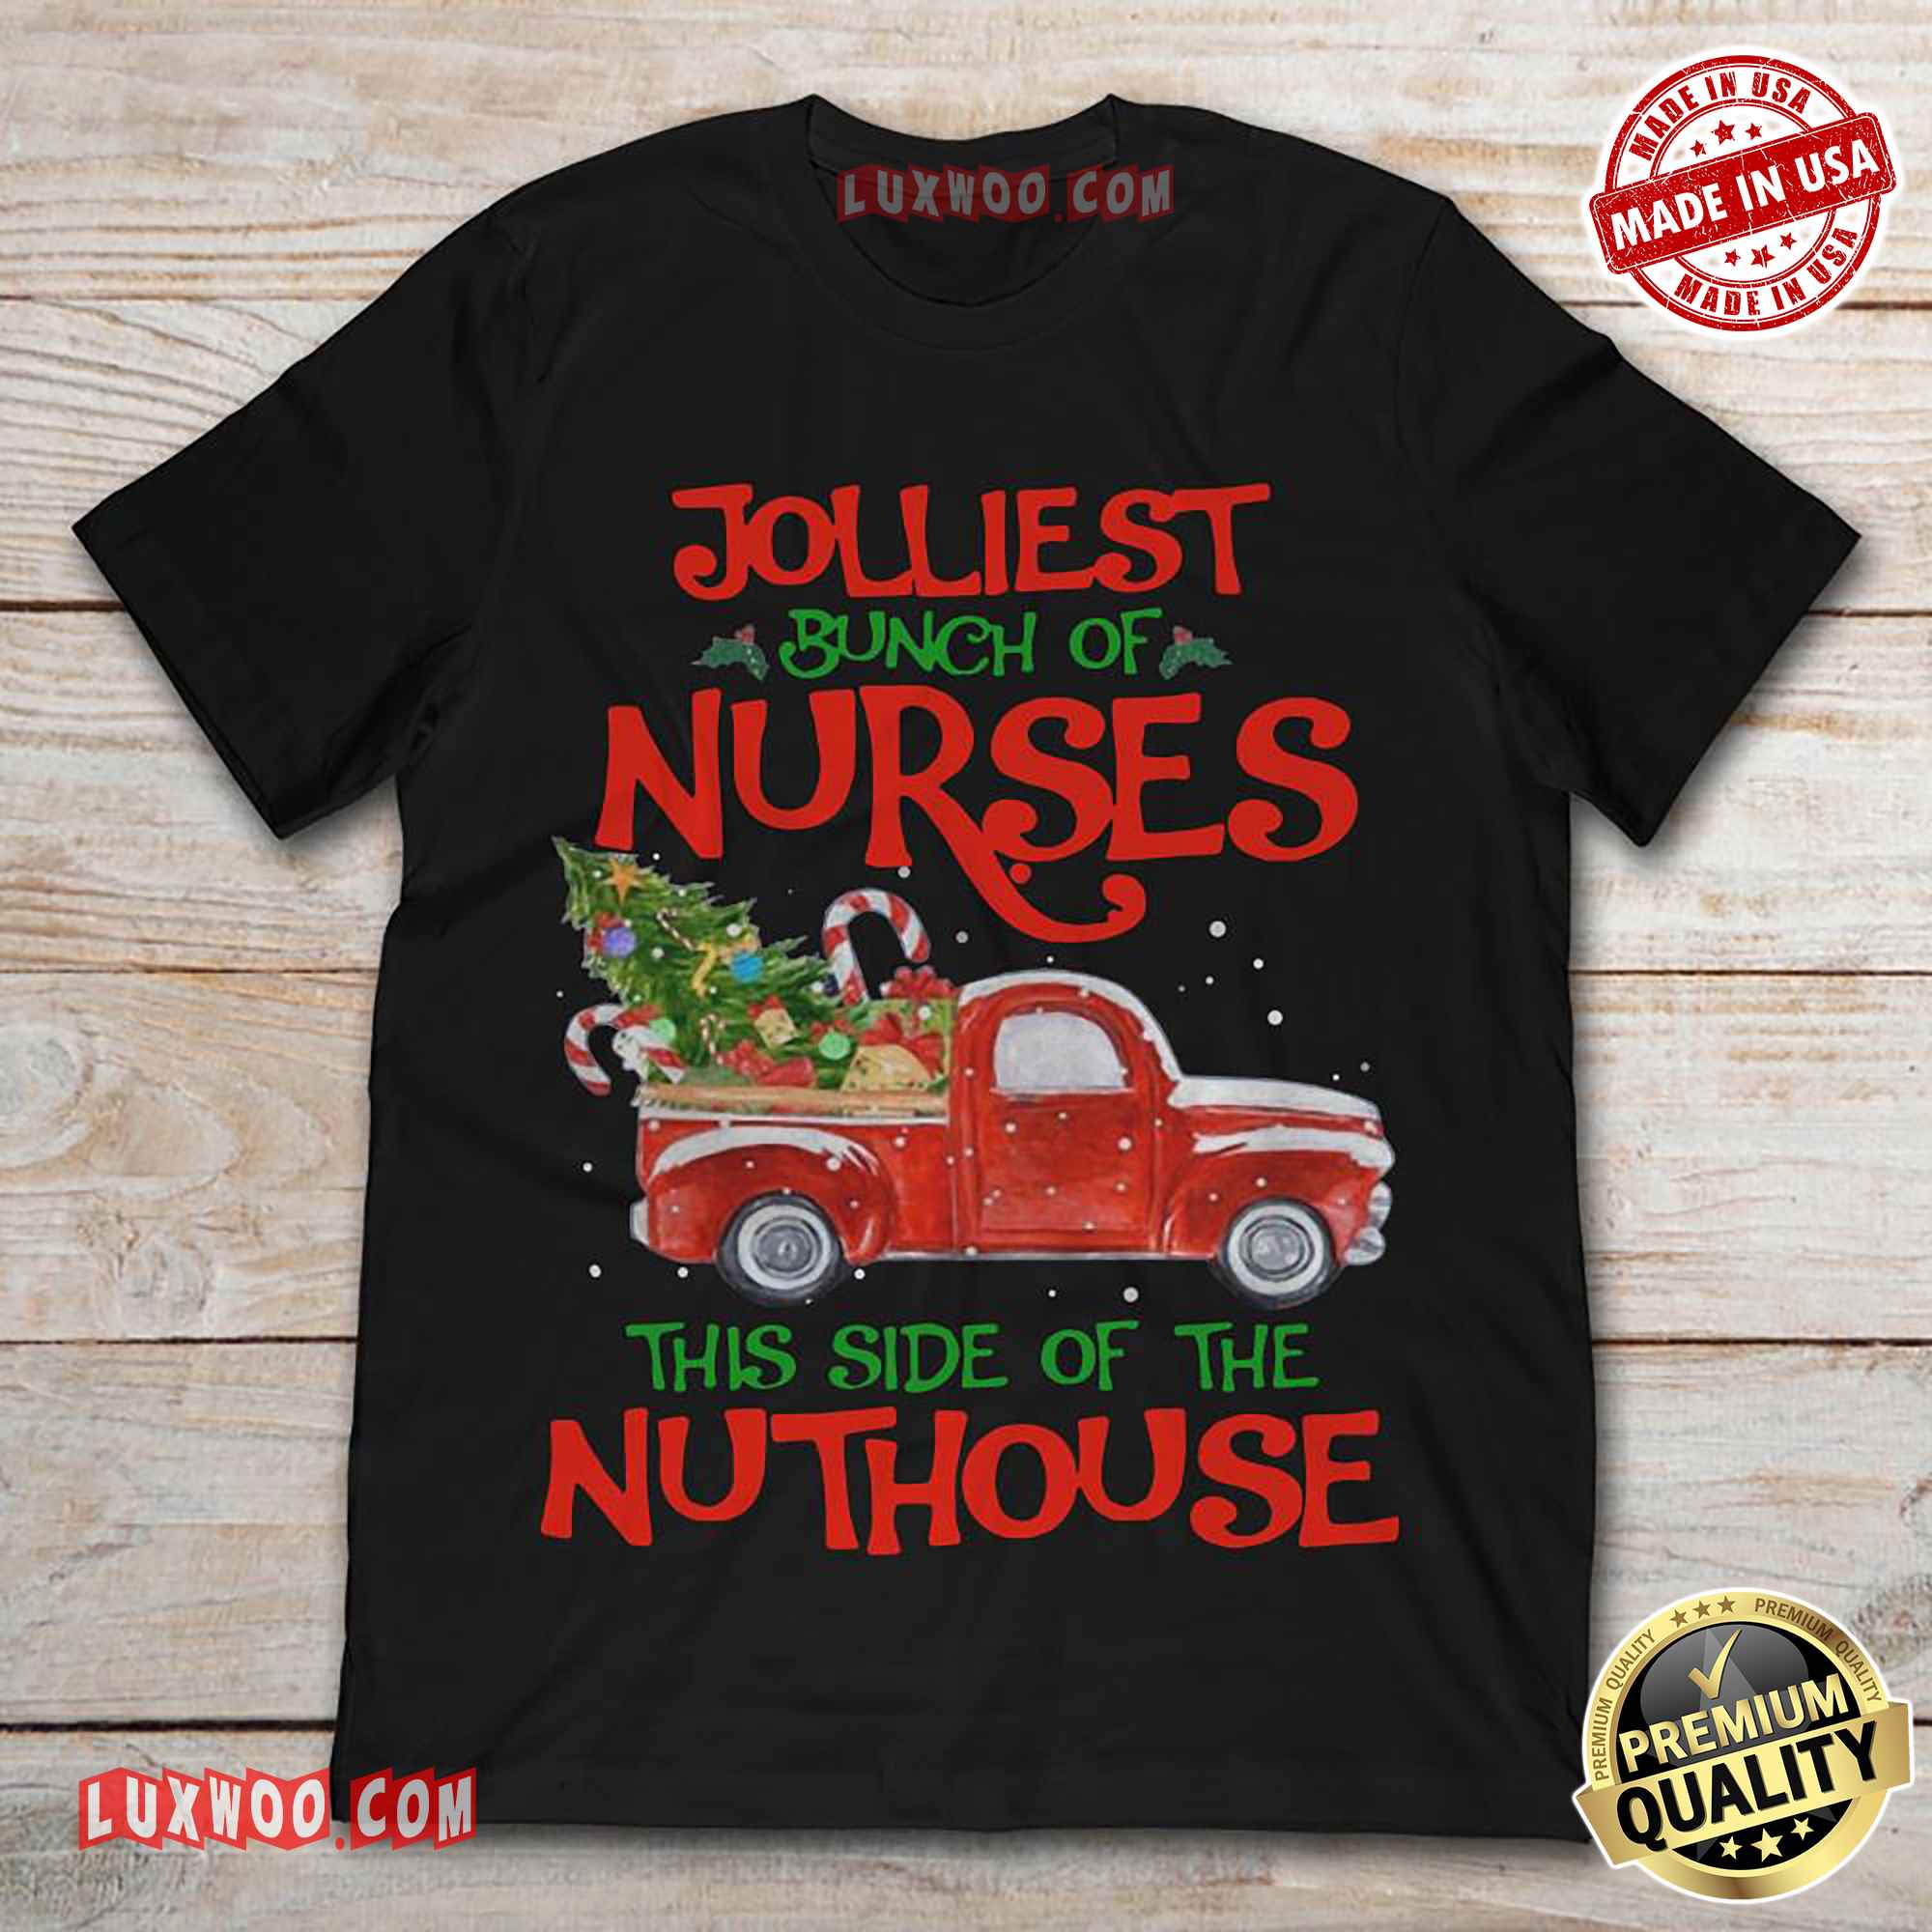 Jolliest Bunch Of Nurses This Side Of The Nuthouse Shirt